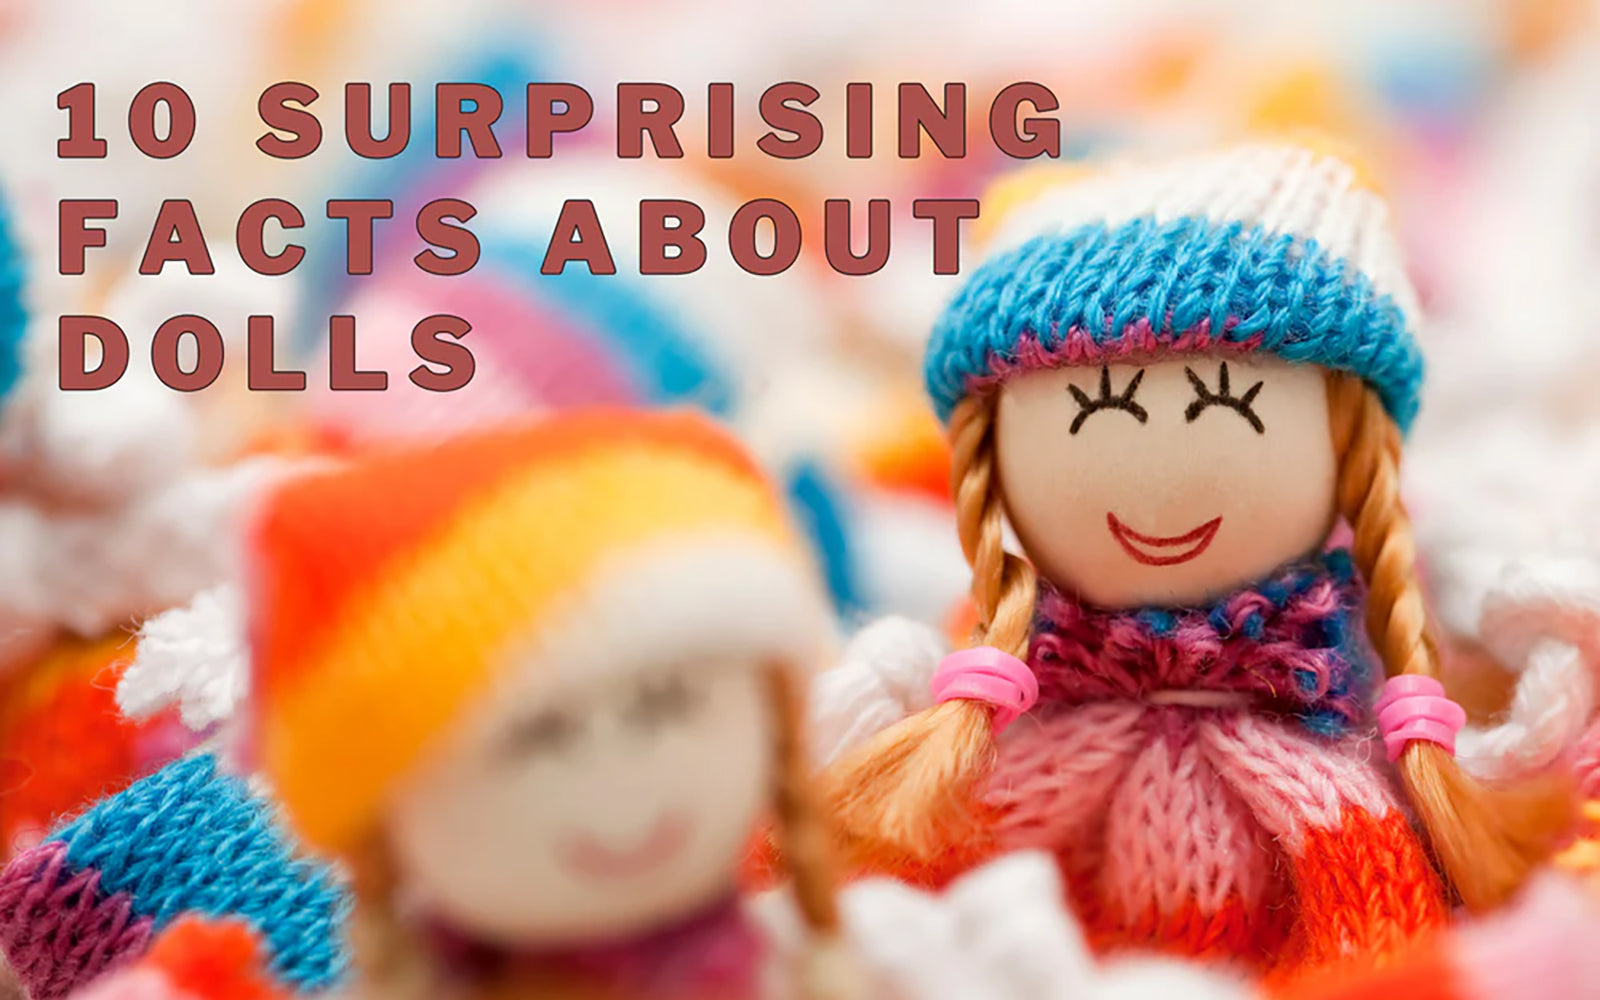 10 Surprising and Hilarious Facts About Dolls You Never Knew